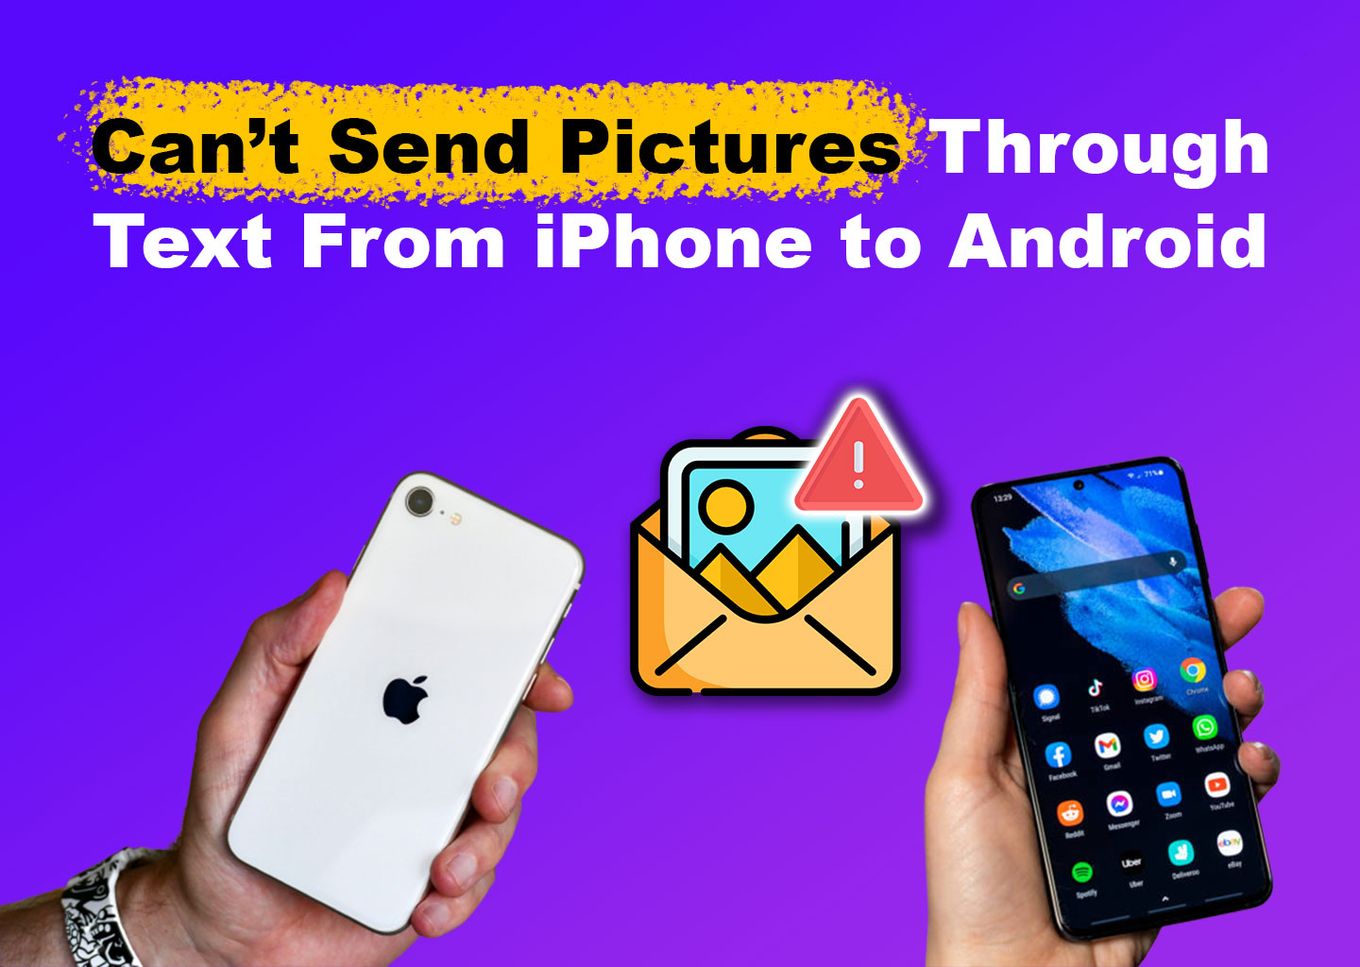 Can't Send Pictures Through Text From iPhone to Android